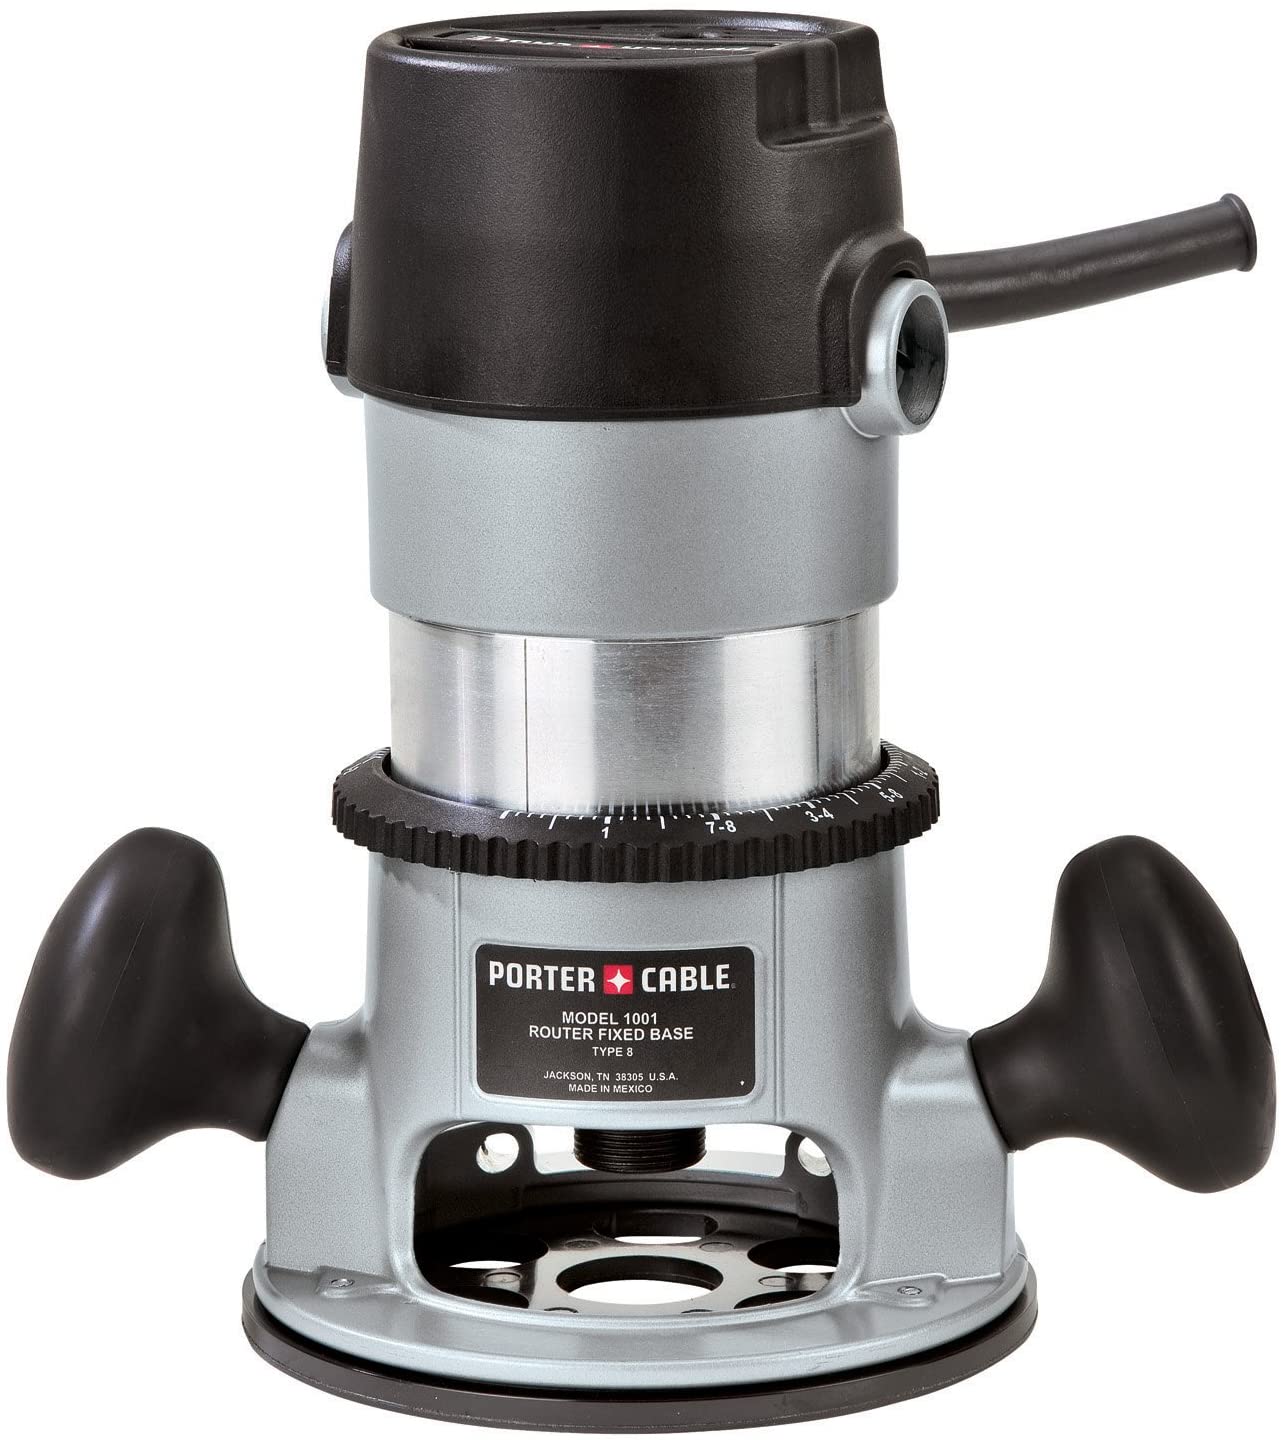 PORTER-CABLE 690LR 1.75 HP Wood Router